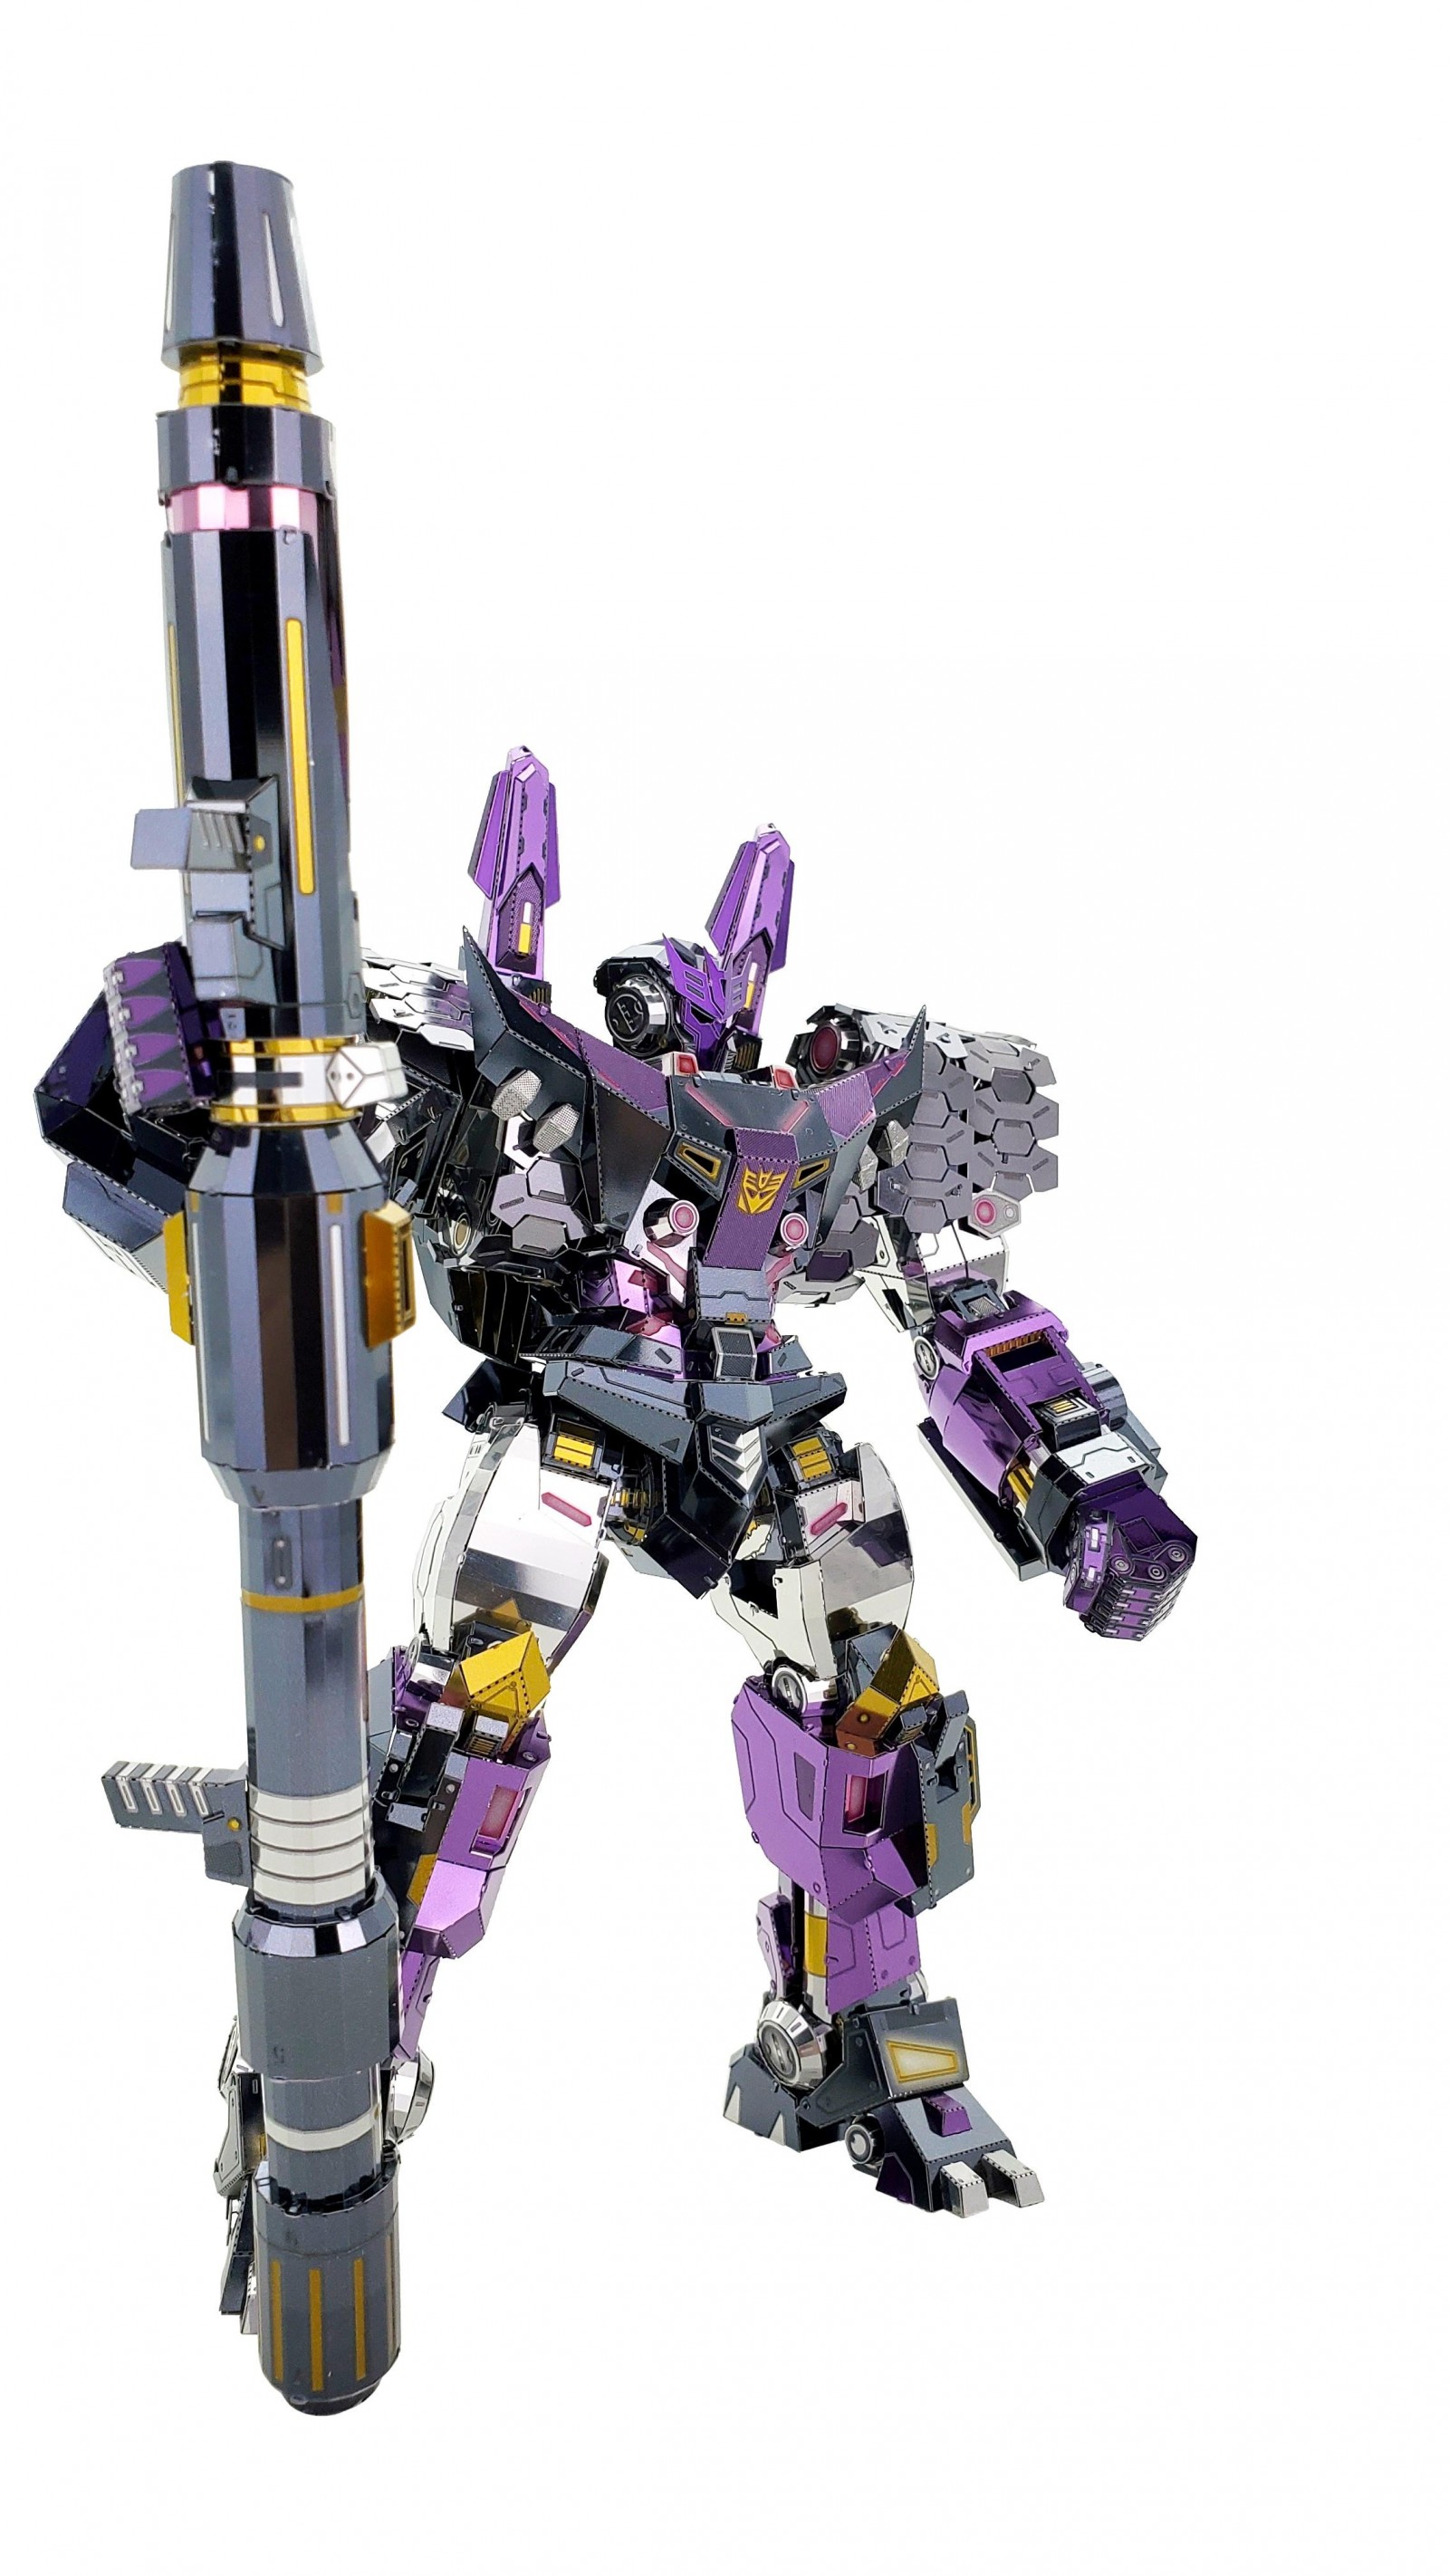 Transformers News: New Metal MU Model of Transformers IDW Tarn Leader of the Decepticon Justice Division